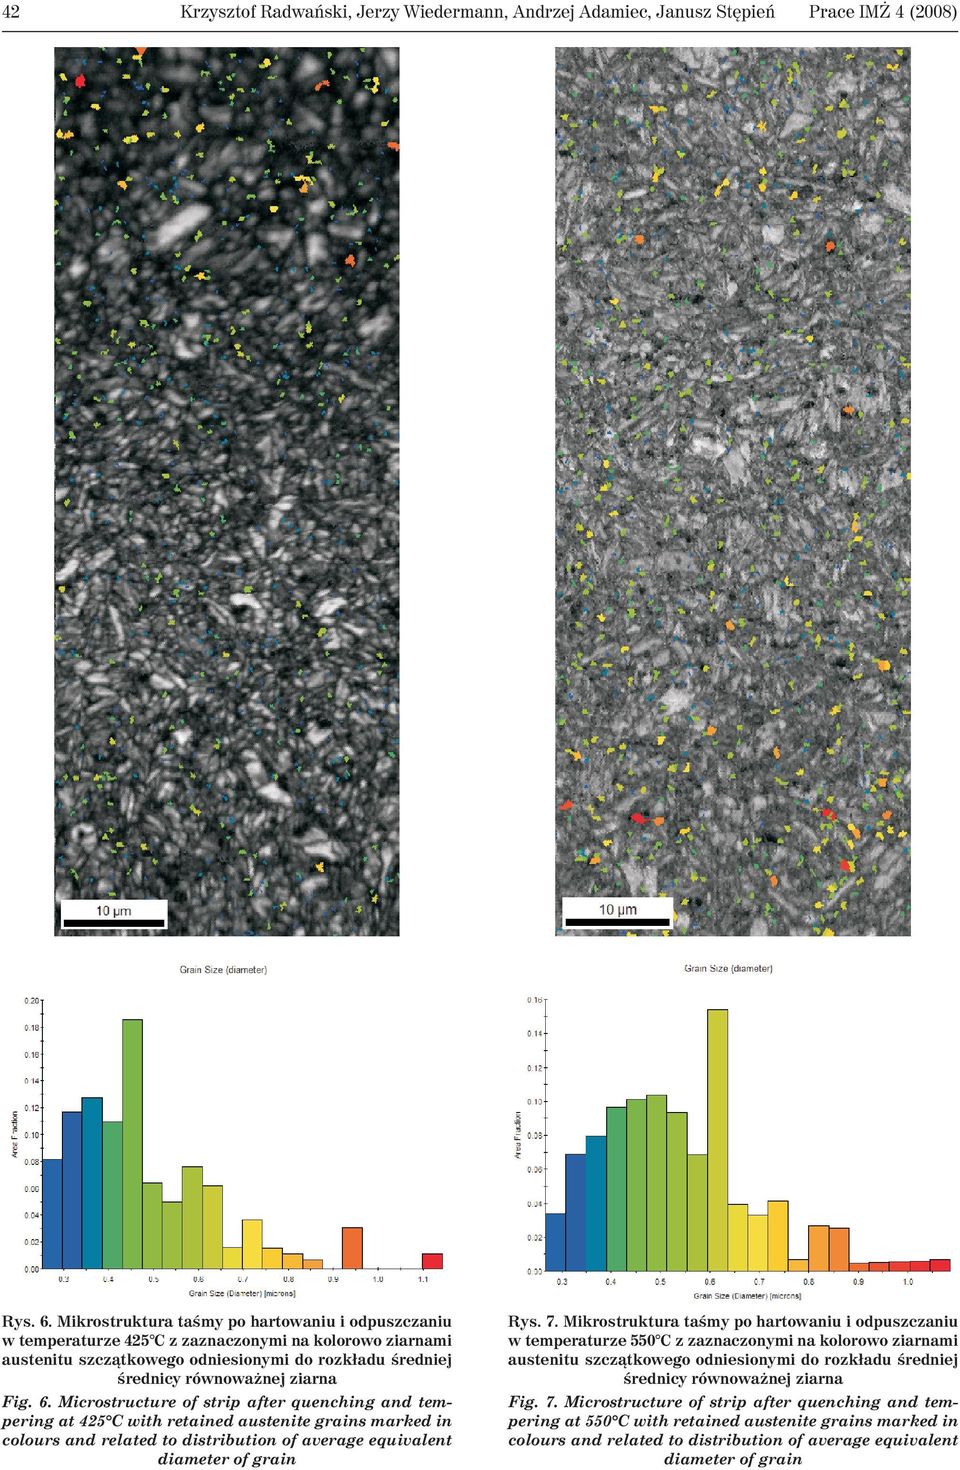 Microstructure of strip after quenching and tempering at 425 C with retained austenite grains marked in colours and related to distribution of average equivalent diameter of grain Prace IM 4 (2008)